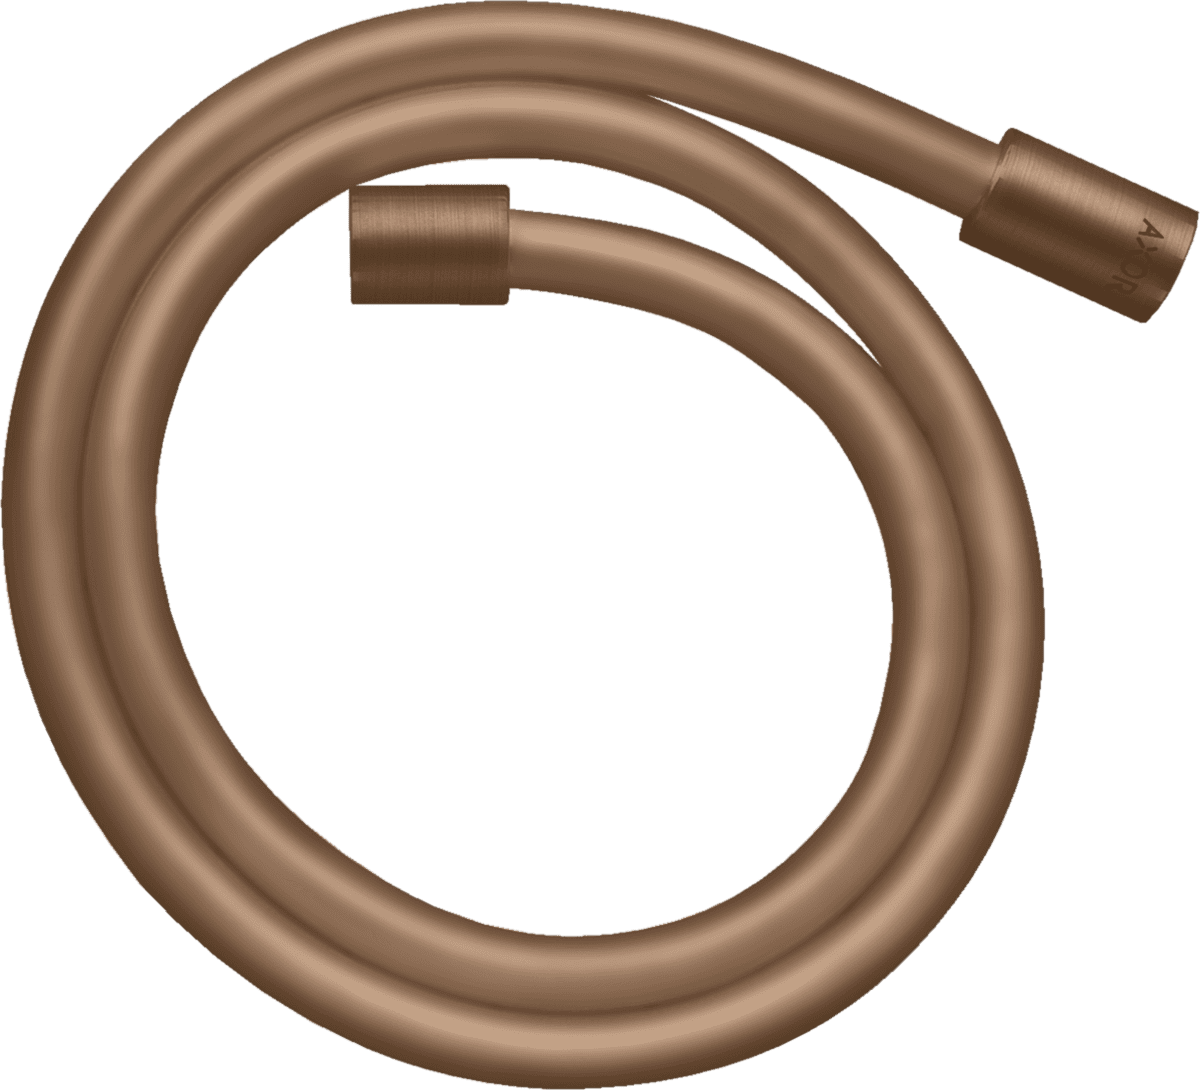 Picture of HANSGROHE AXOR Starck Metal effect shower hose 2.00 m with cylindrical nuts #28284310 - Brushed Red Gold